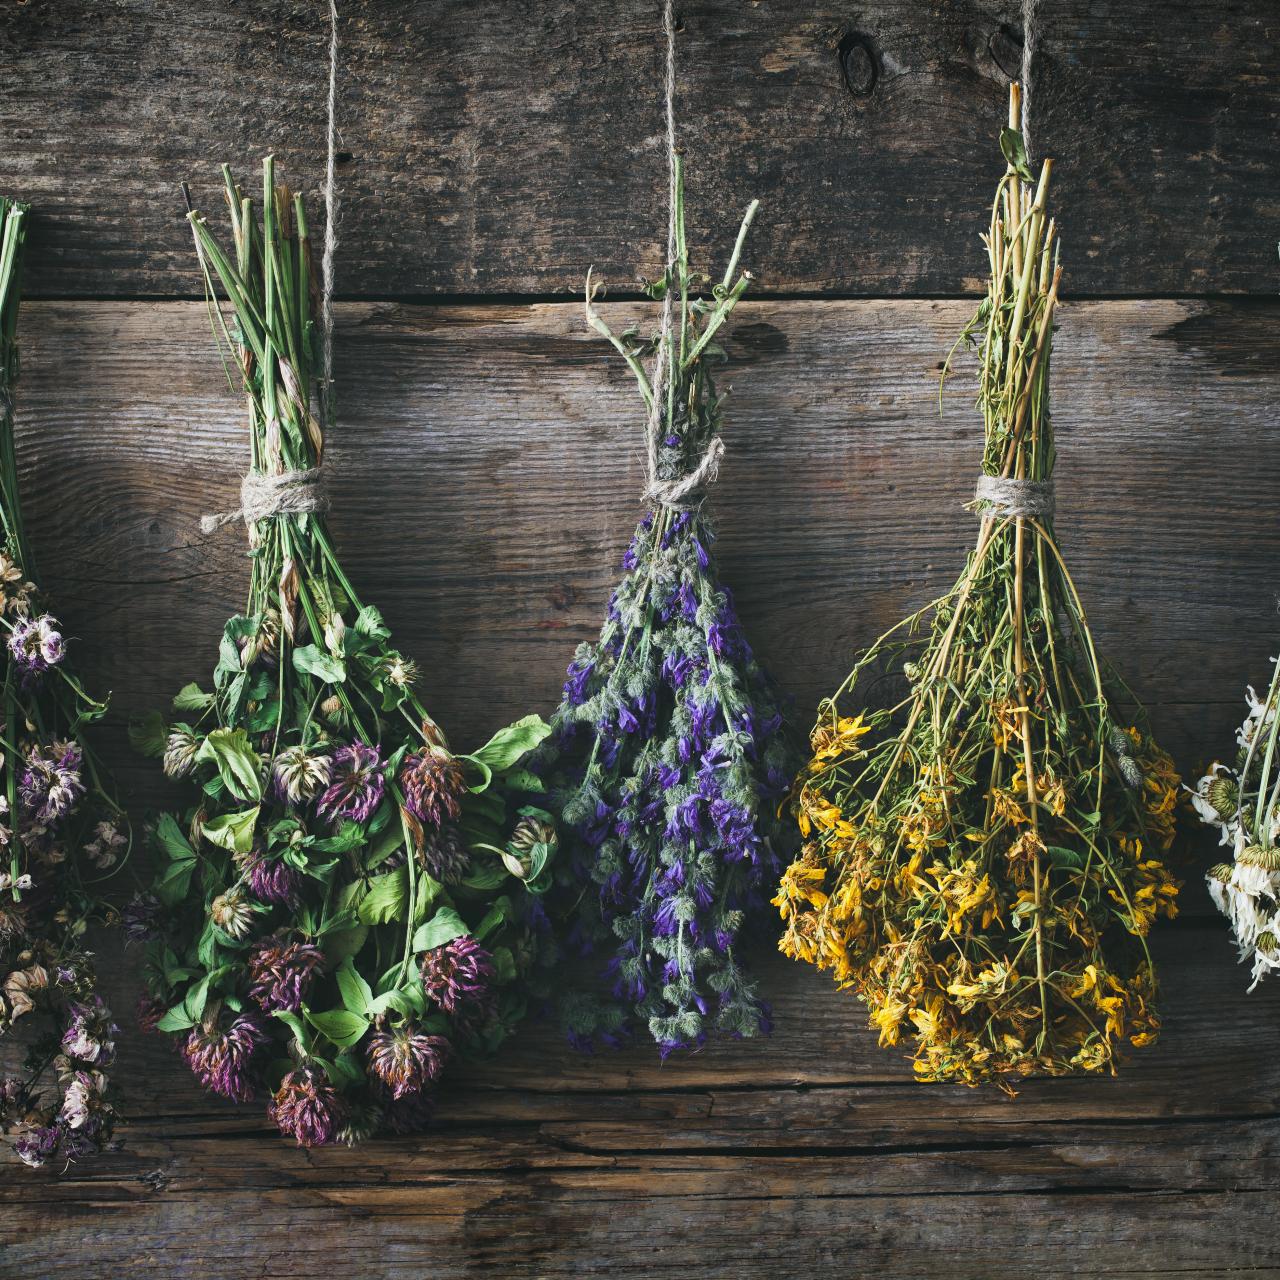 Keep Your Flowers Forever: A DIY Project on Dried Florals